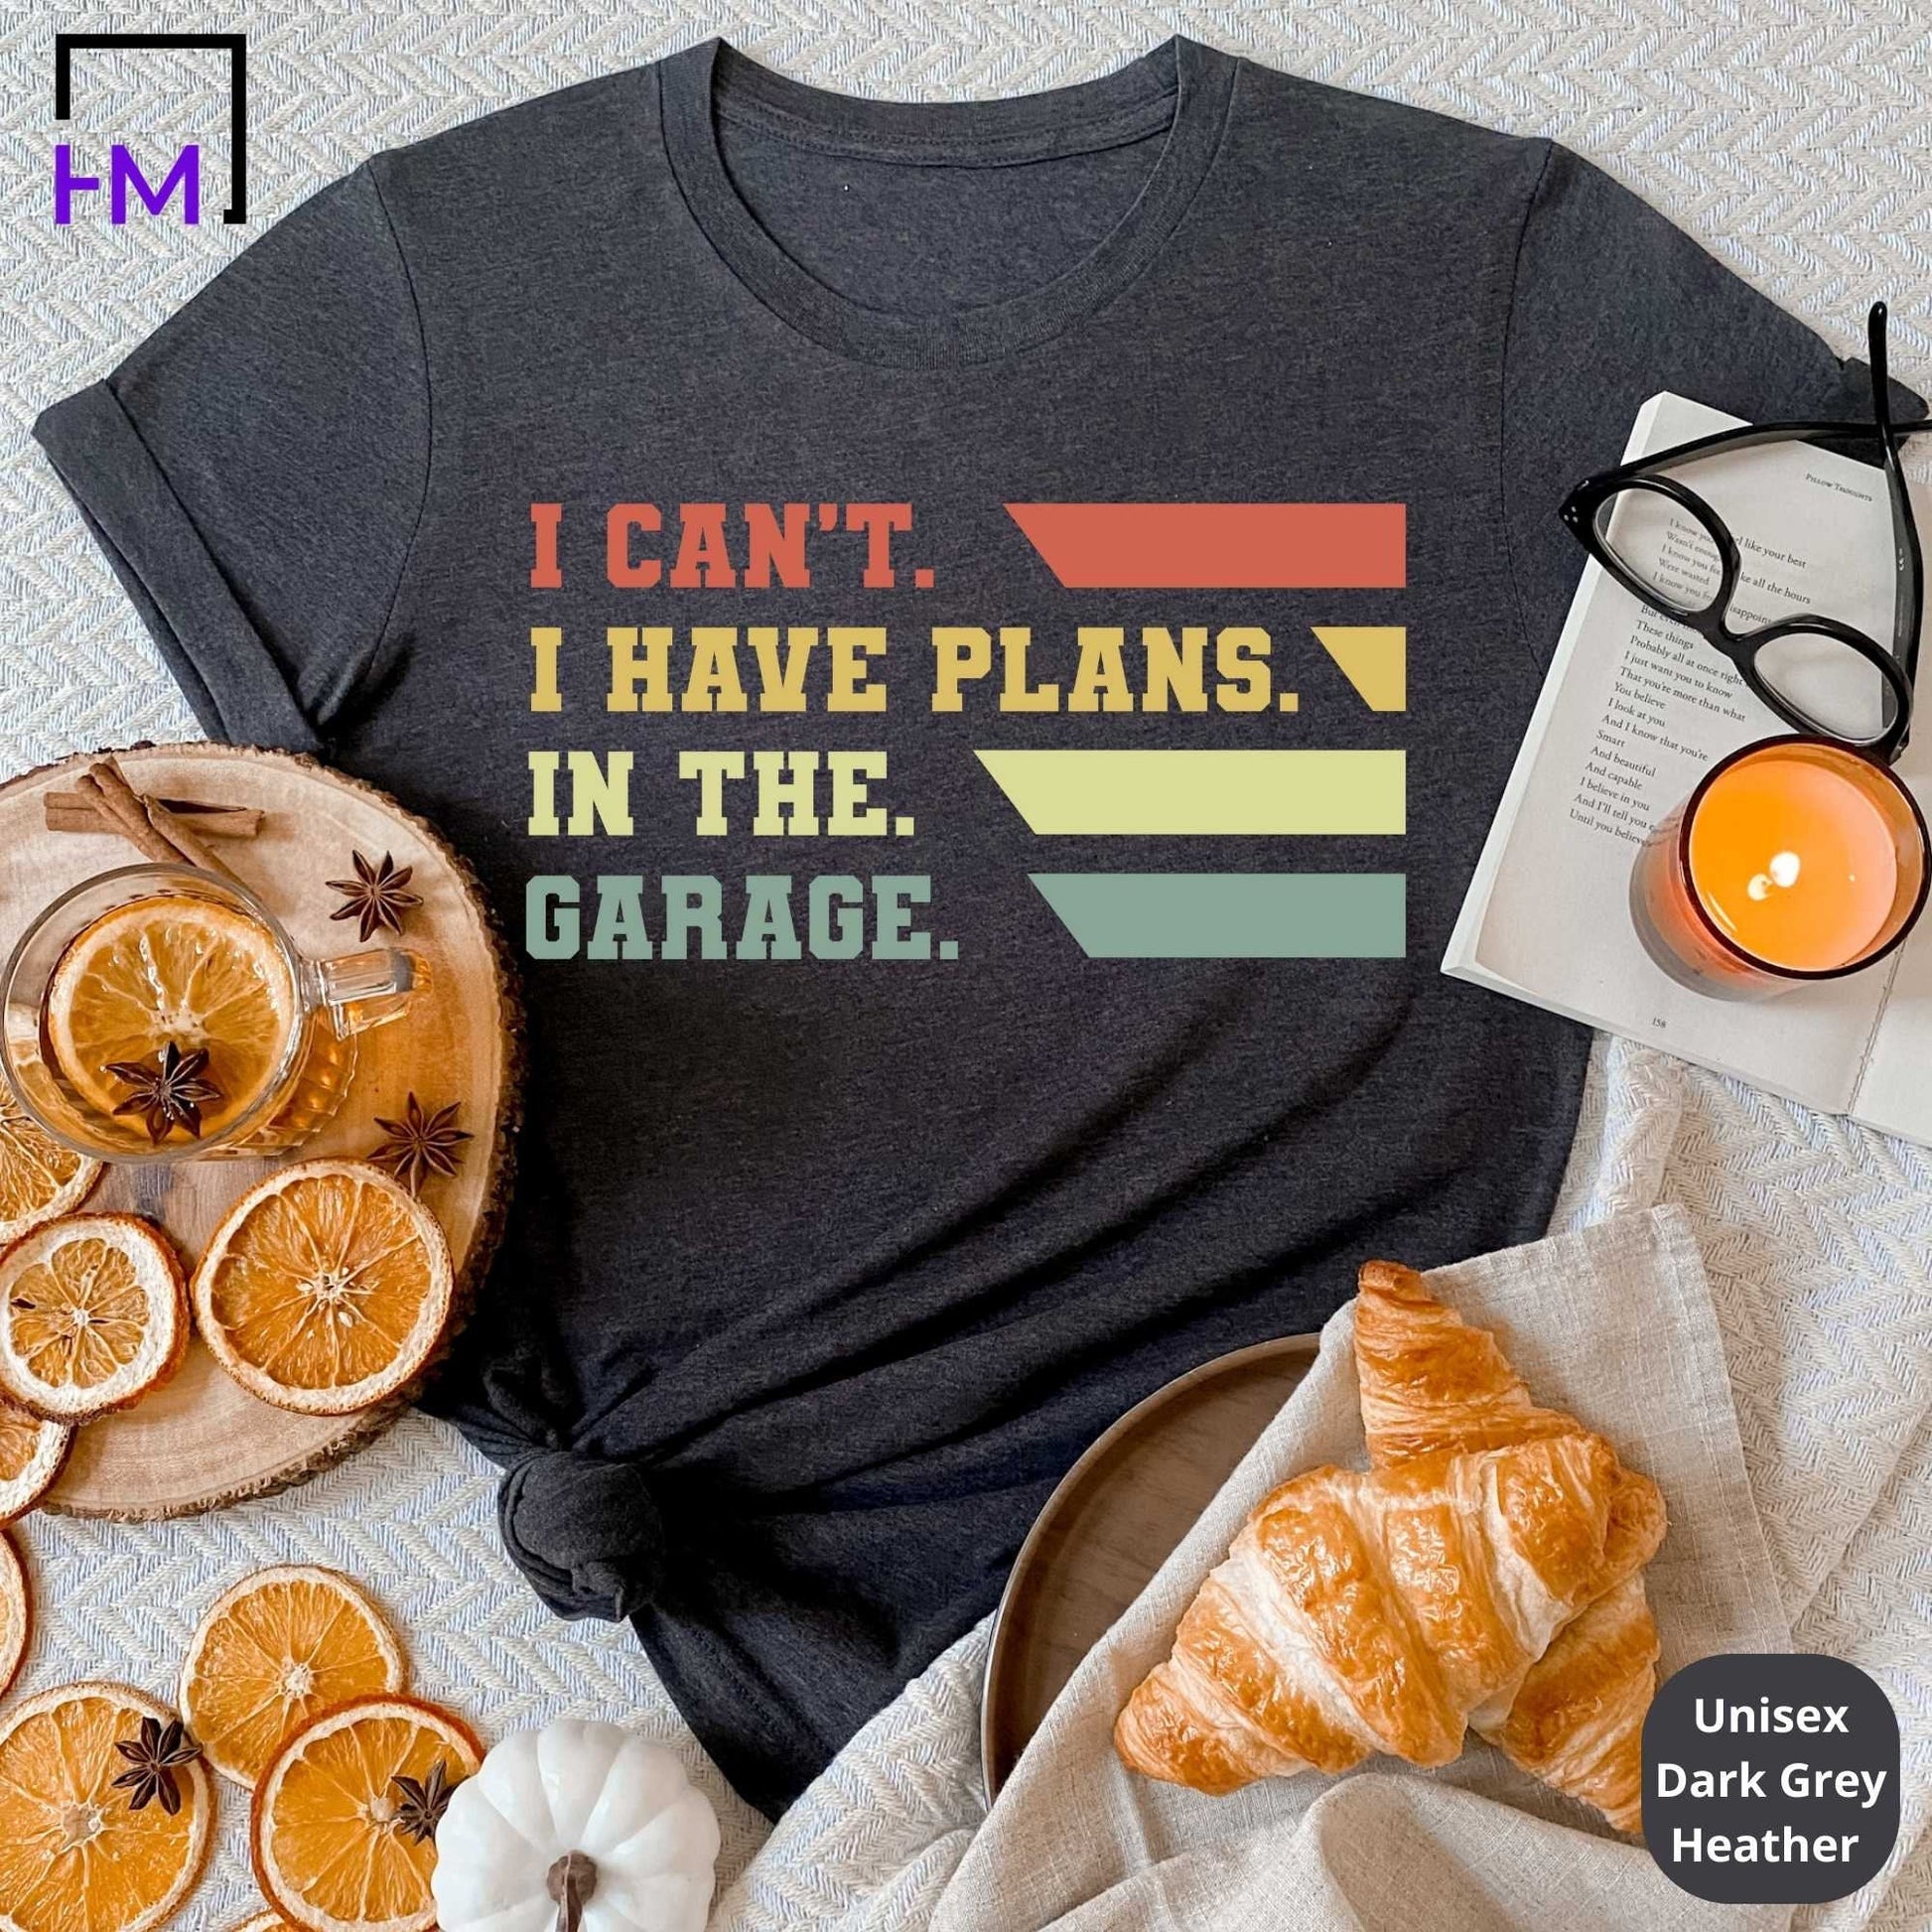 Car Enthusiast Shirt, Car Guy Shirt, Dad Gift, Car Lover Gift, Father's Day Gift, Garage Weekends, Cars Collector Shirt, Funny Car Lover HMDesignStudioUS